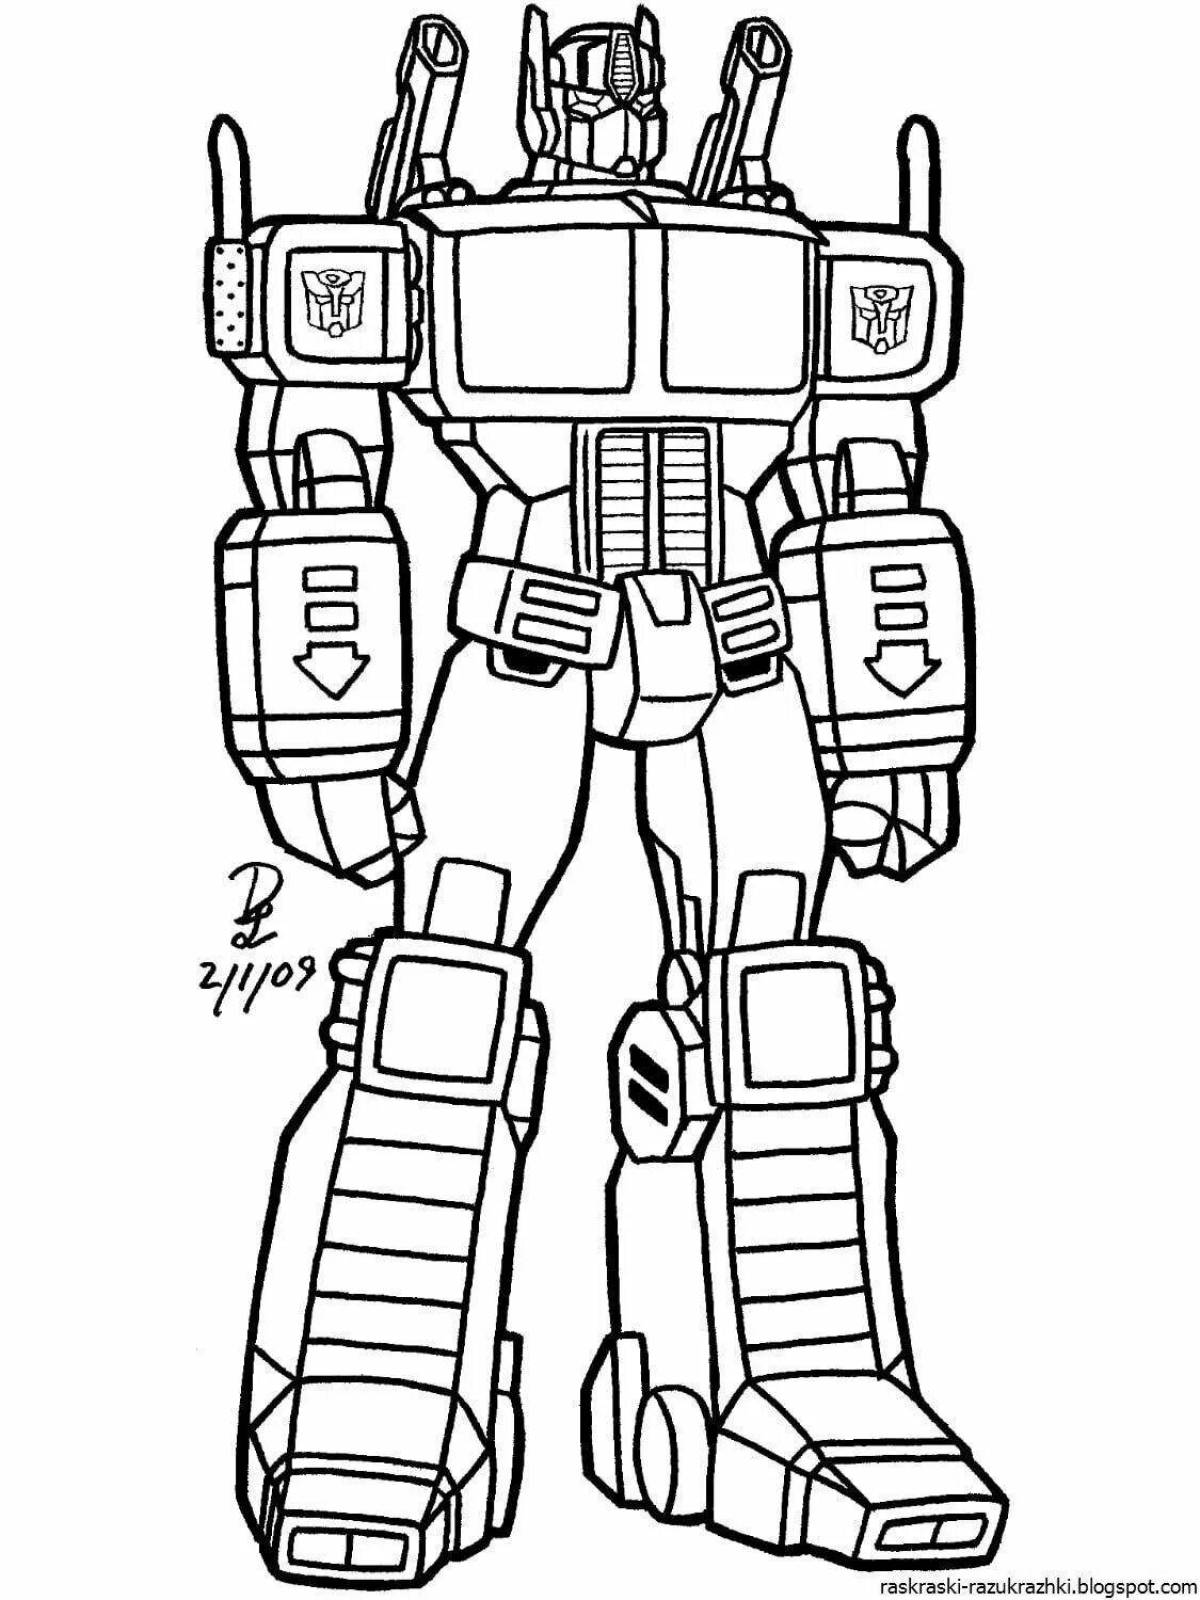 A fun transforming robot coloring page for kids